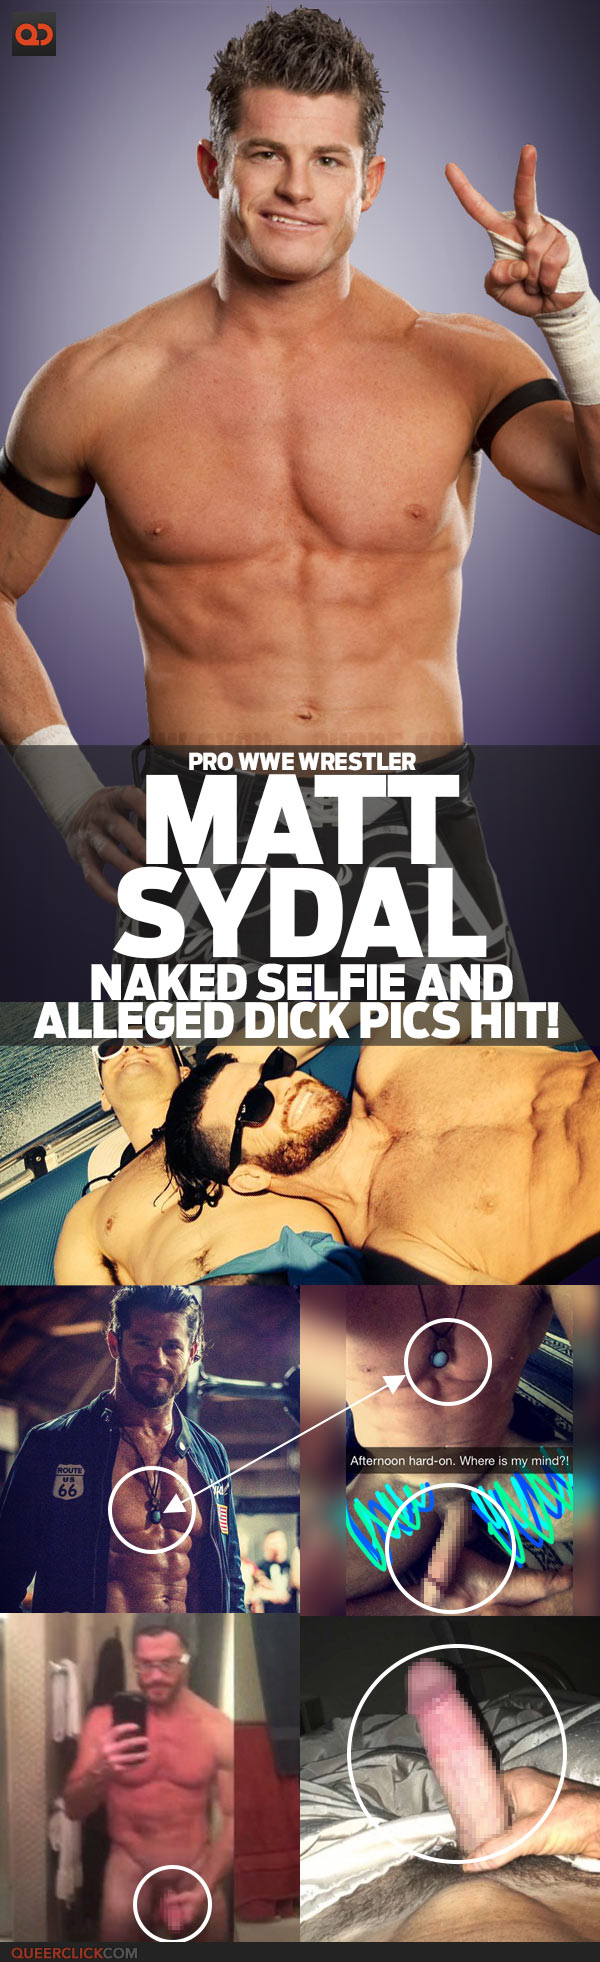 Wwe Superstar Fucking - Matt Sydal, Pro WWE Wrestler, Naked Selfie And Alleged Dick Pics Hit! -  QueerClick